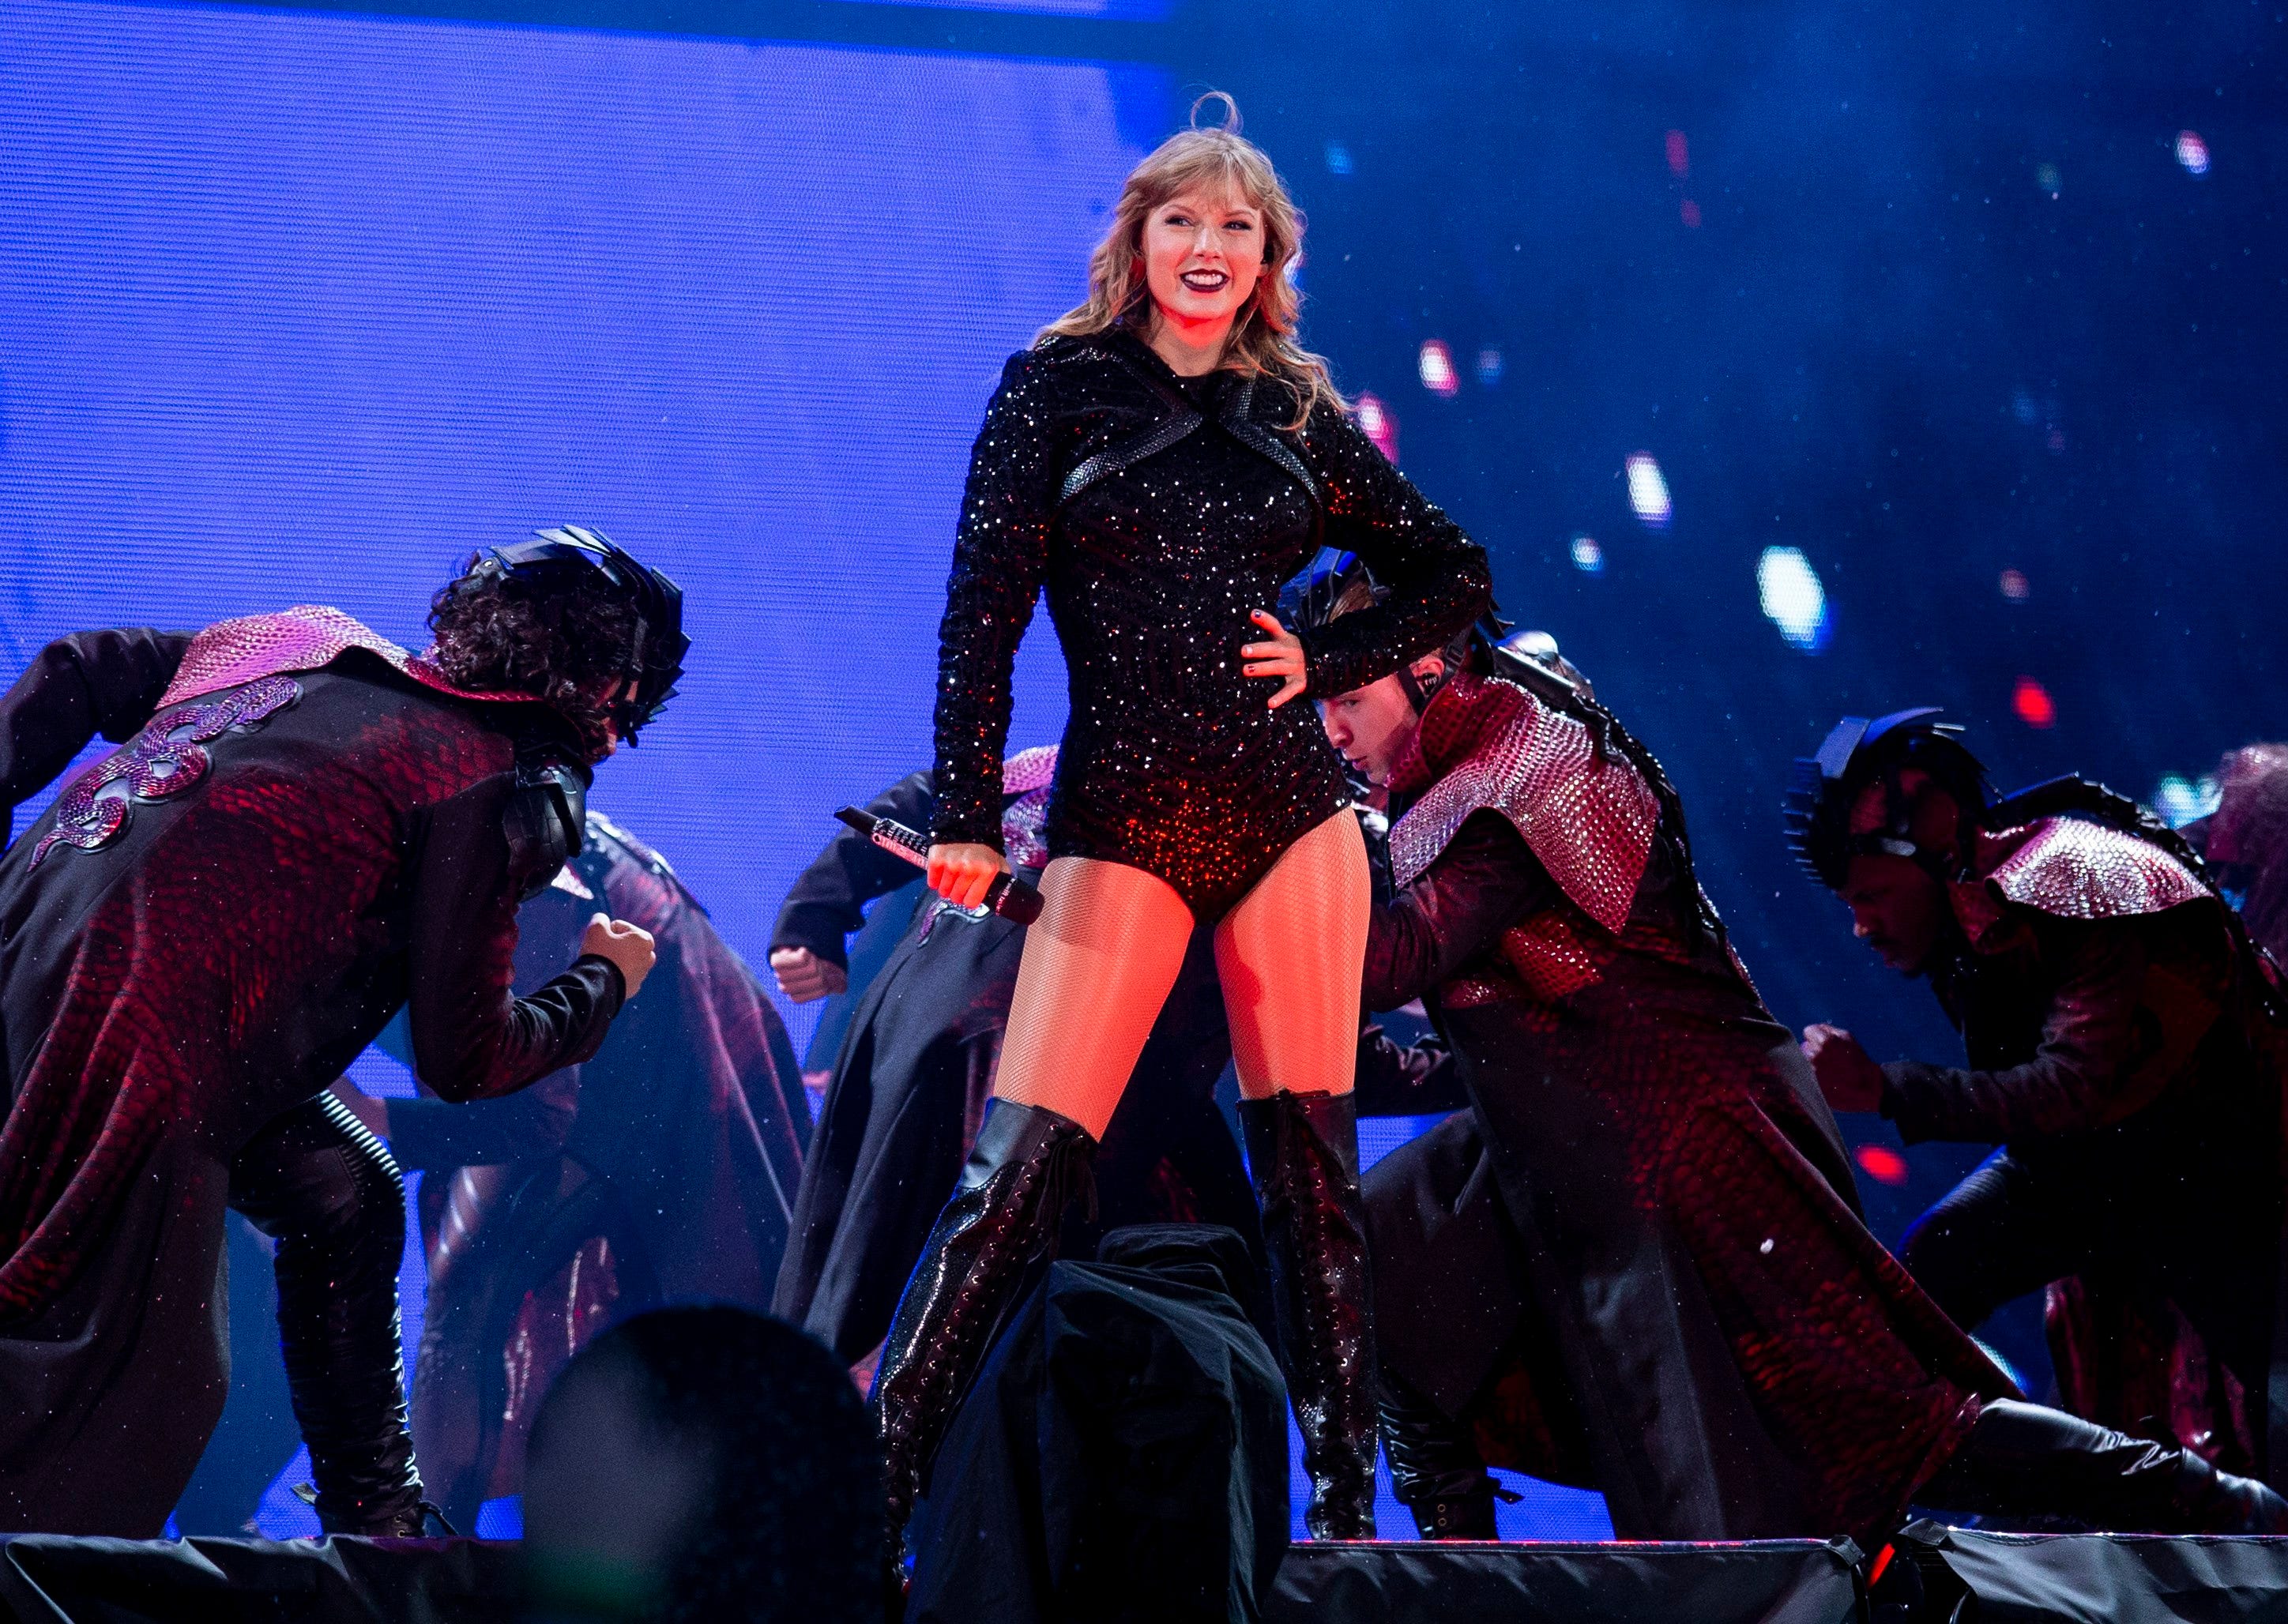 Taylor Swift performs during a stop on the Reputation Tour at Ohio Stadium in Columbus on July 7, 2018.